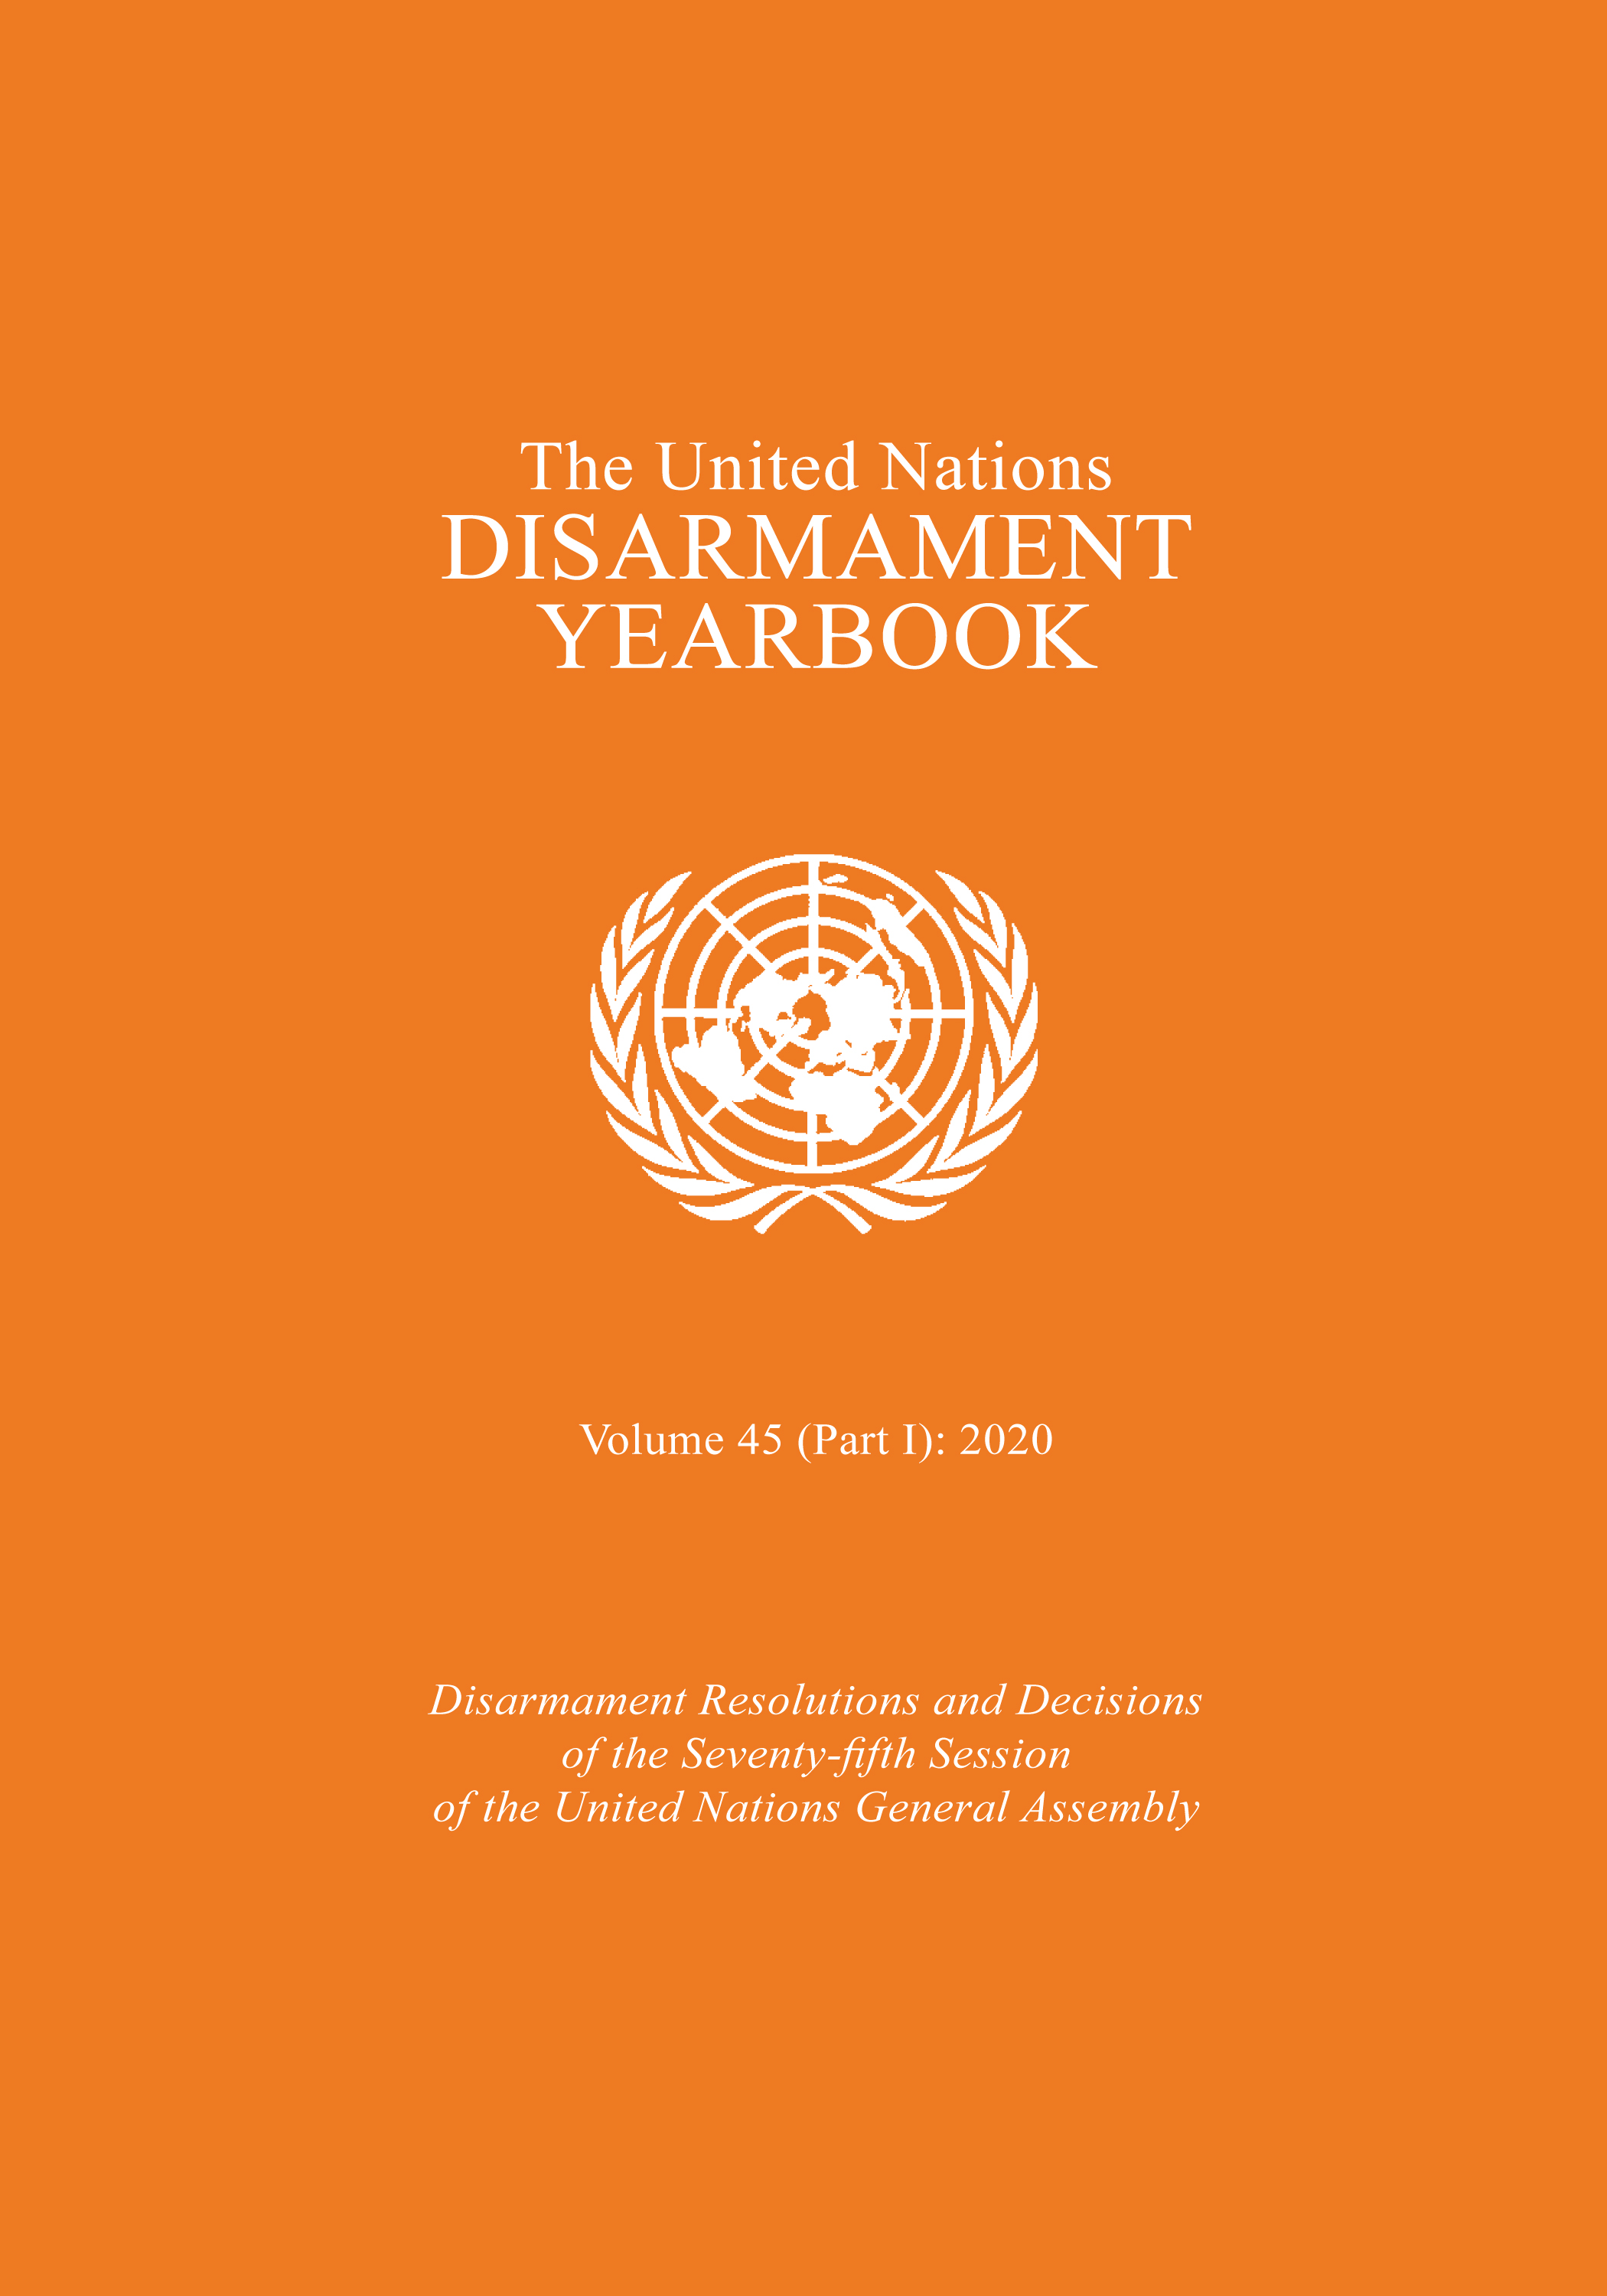 image of 75/34 Conclusion of effective international arrangements to assure non-nuclear-weapon States against the use or threat of use of nuclear weapons